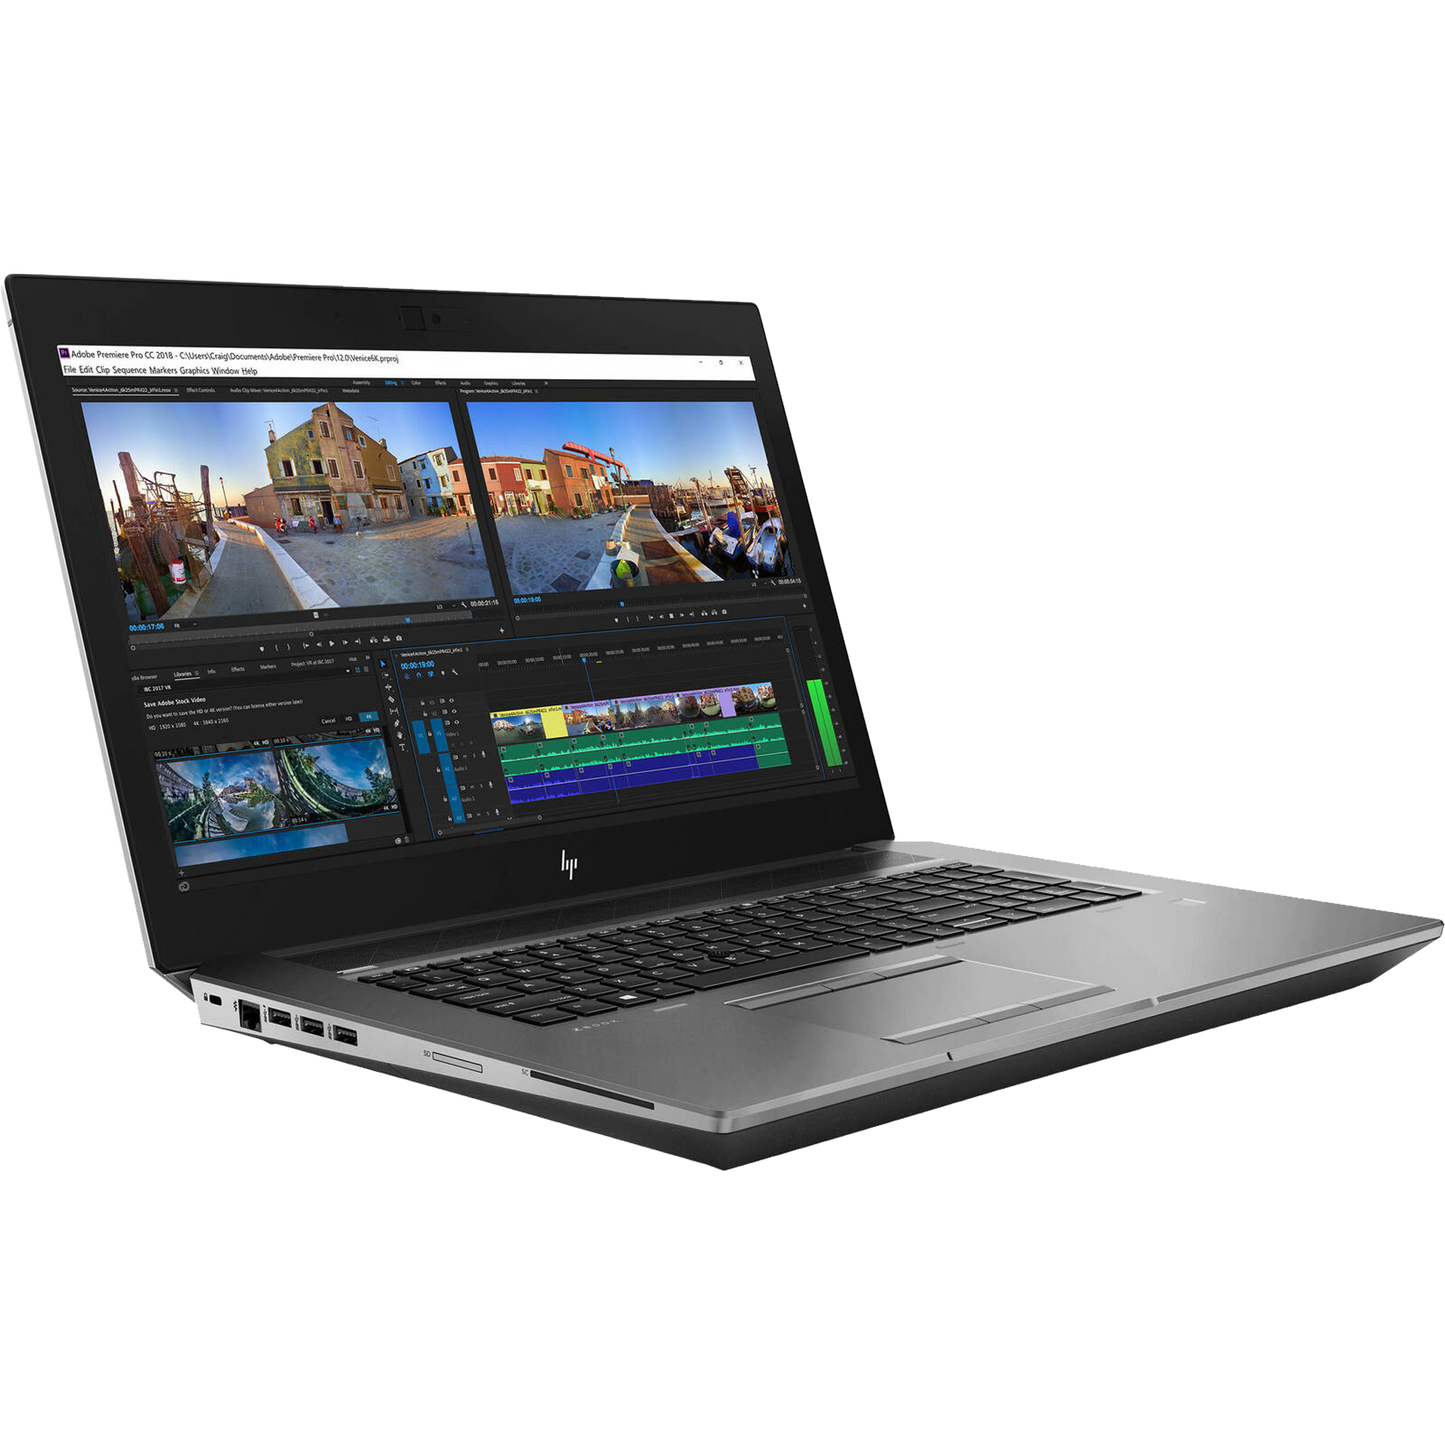 HP ZBook 17 G5 Intel i5, 8th Gen Mobile Workstation with NVIDIA GPU + Win 11 Pro